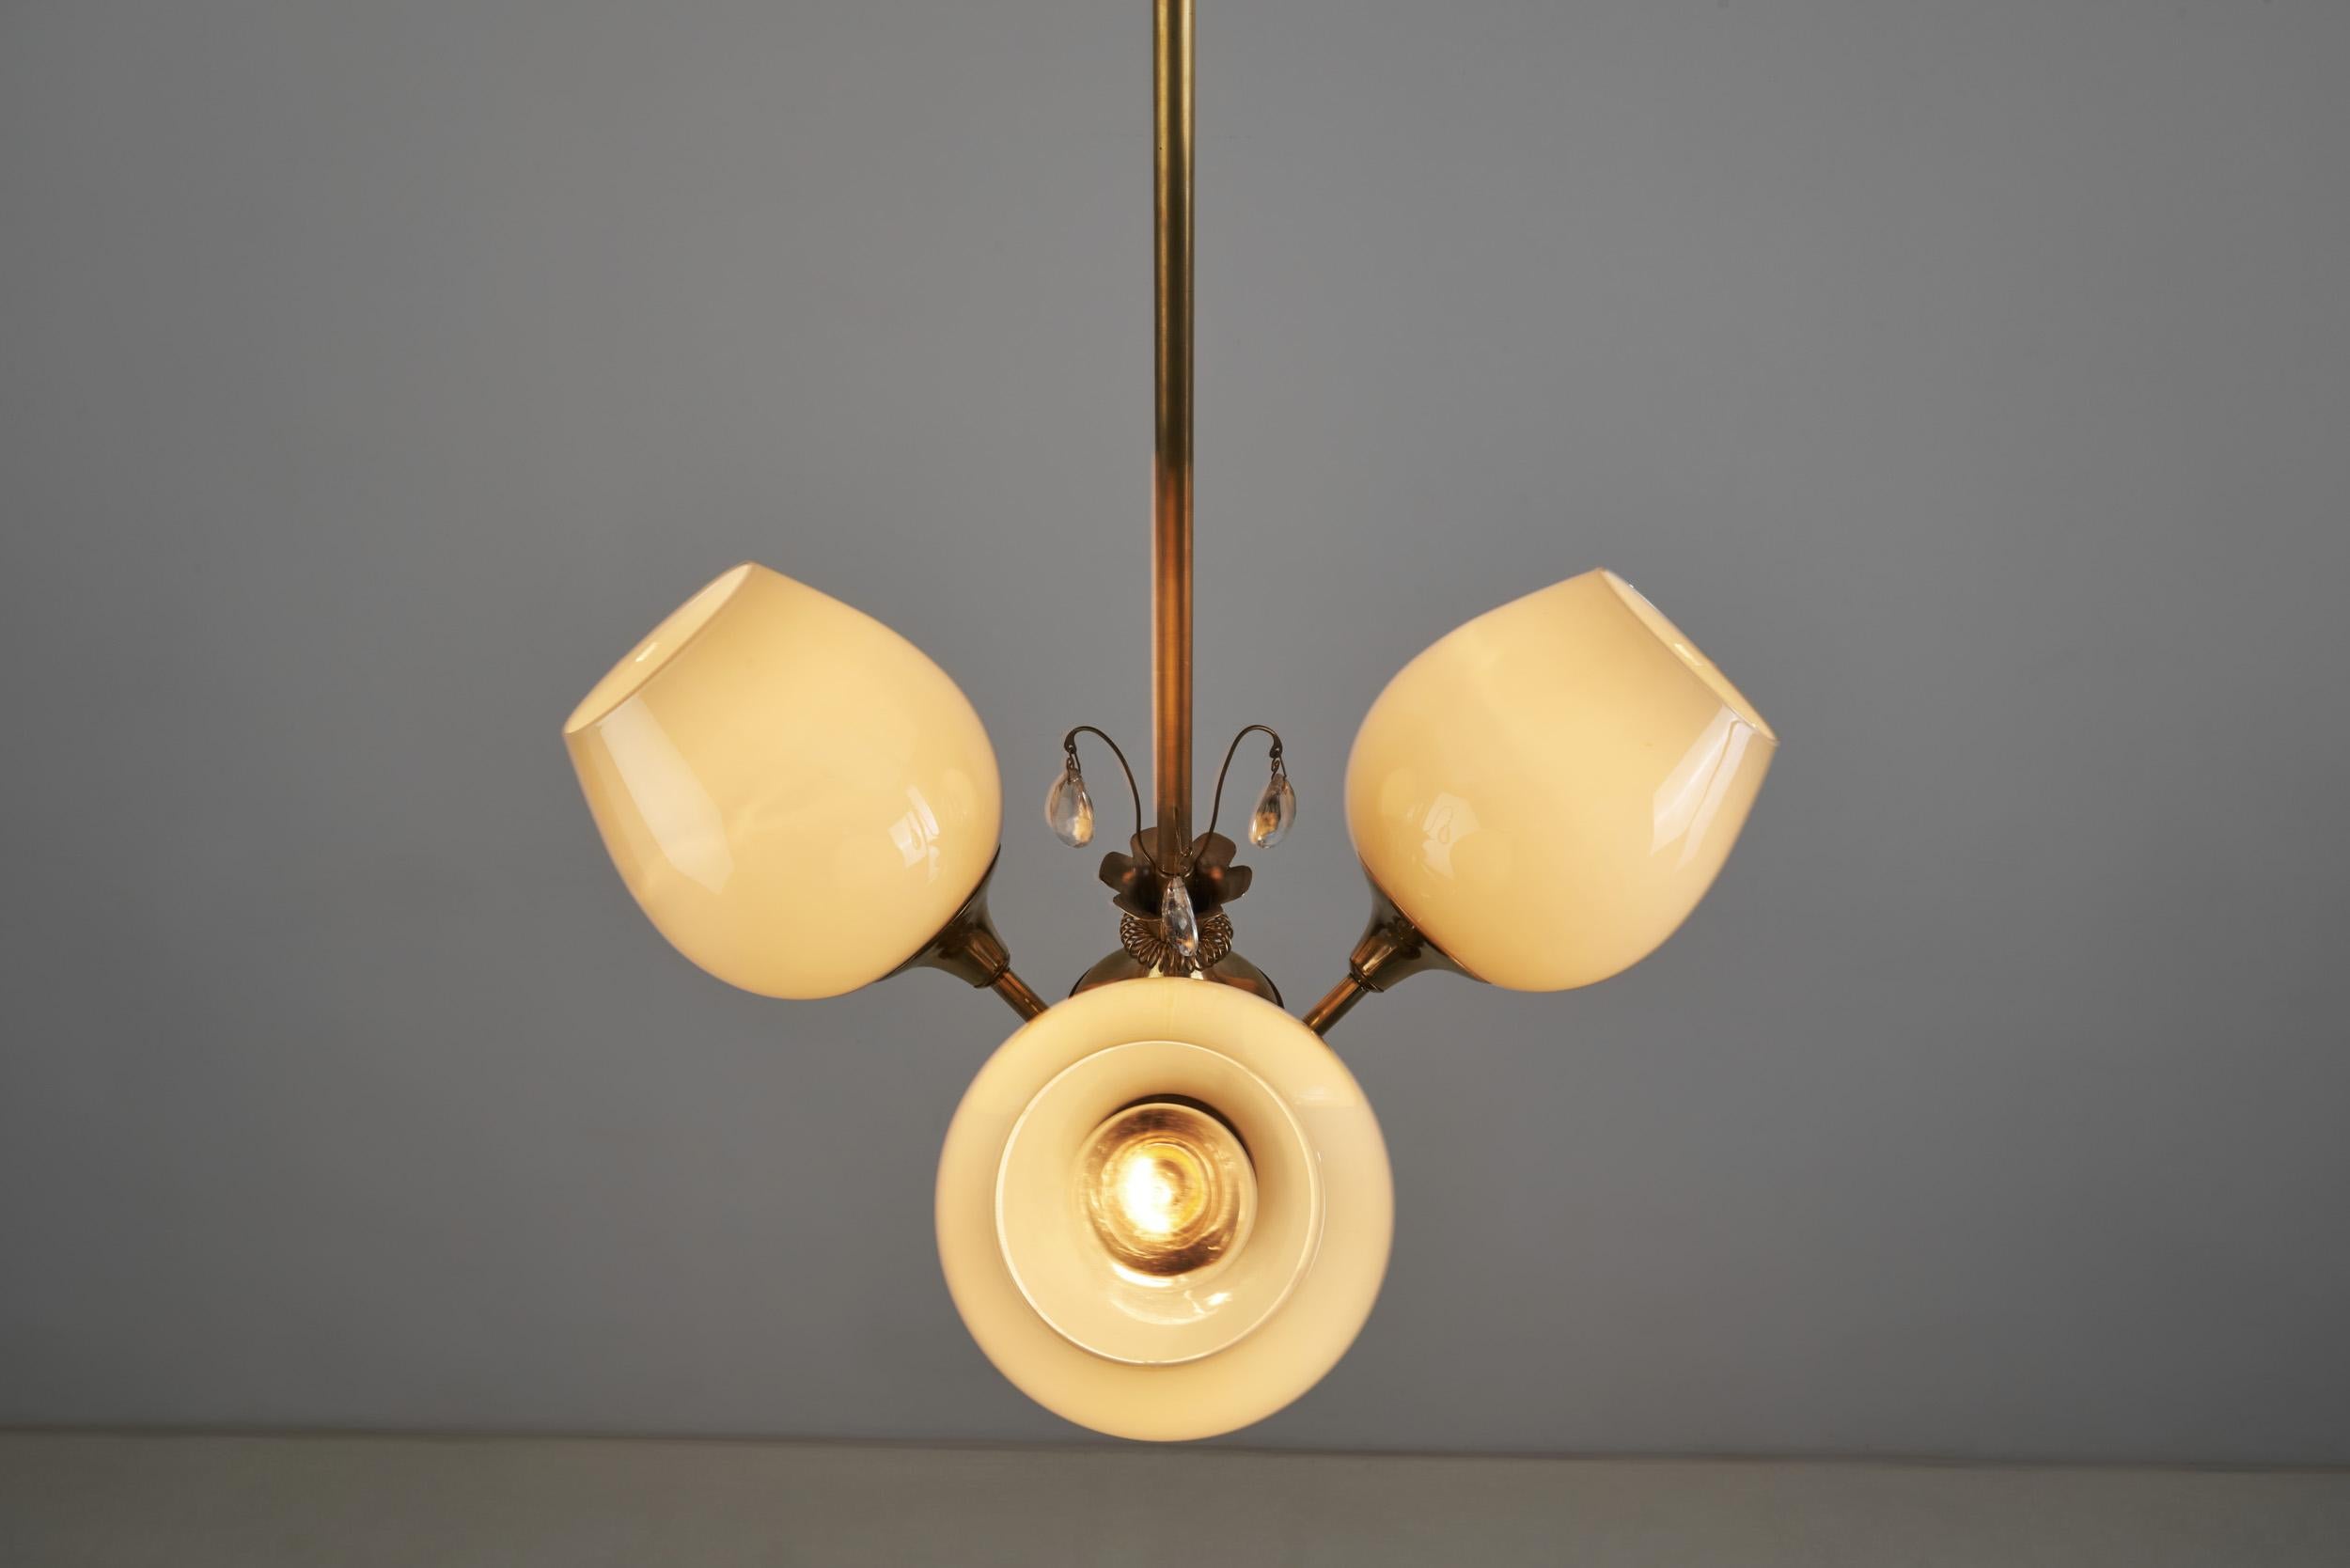 Brass Ceiling Lamp with Opal Shades by Itsu 'Attr.', Finland, ca 1950s For Sale 3